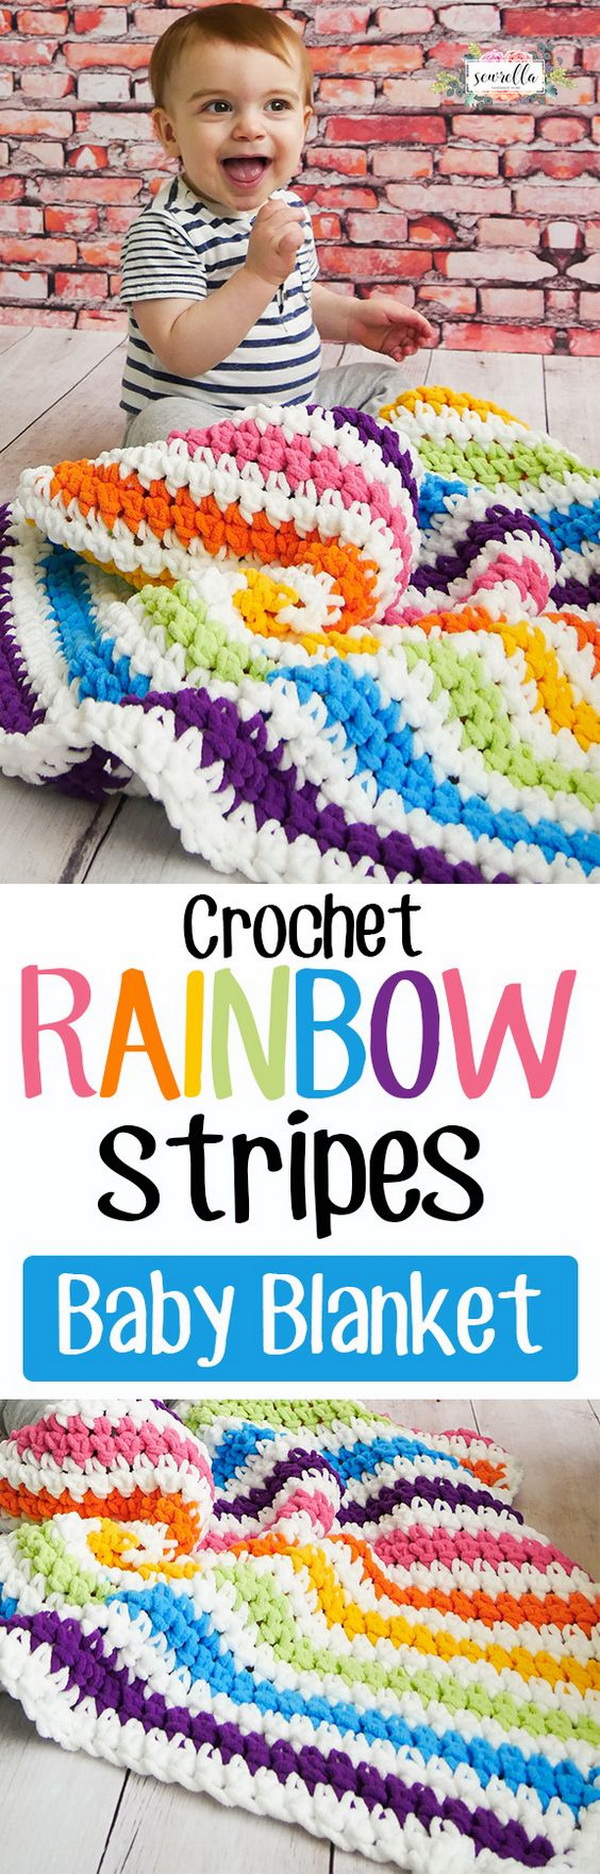 Quick And Easy Crochet Blanket Patterns For Beginners: Crochet Rainbow Stripes Baby Blanket Free Pattern. 